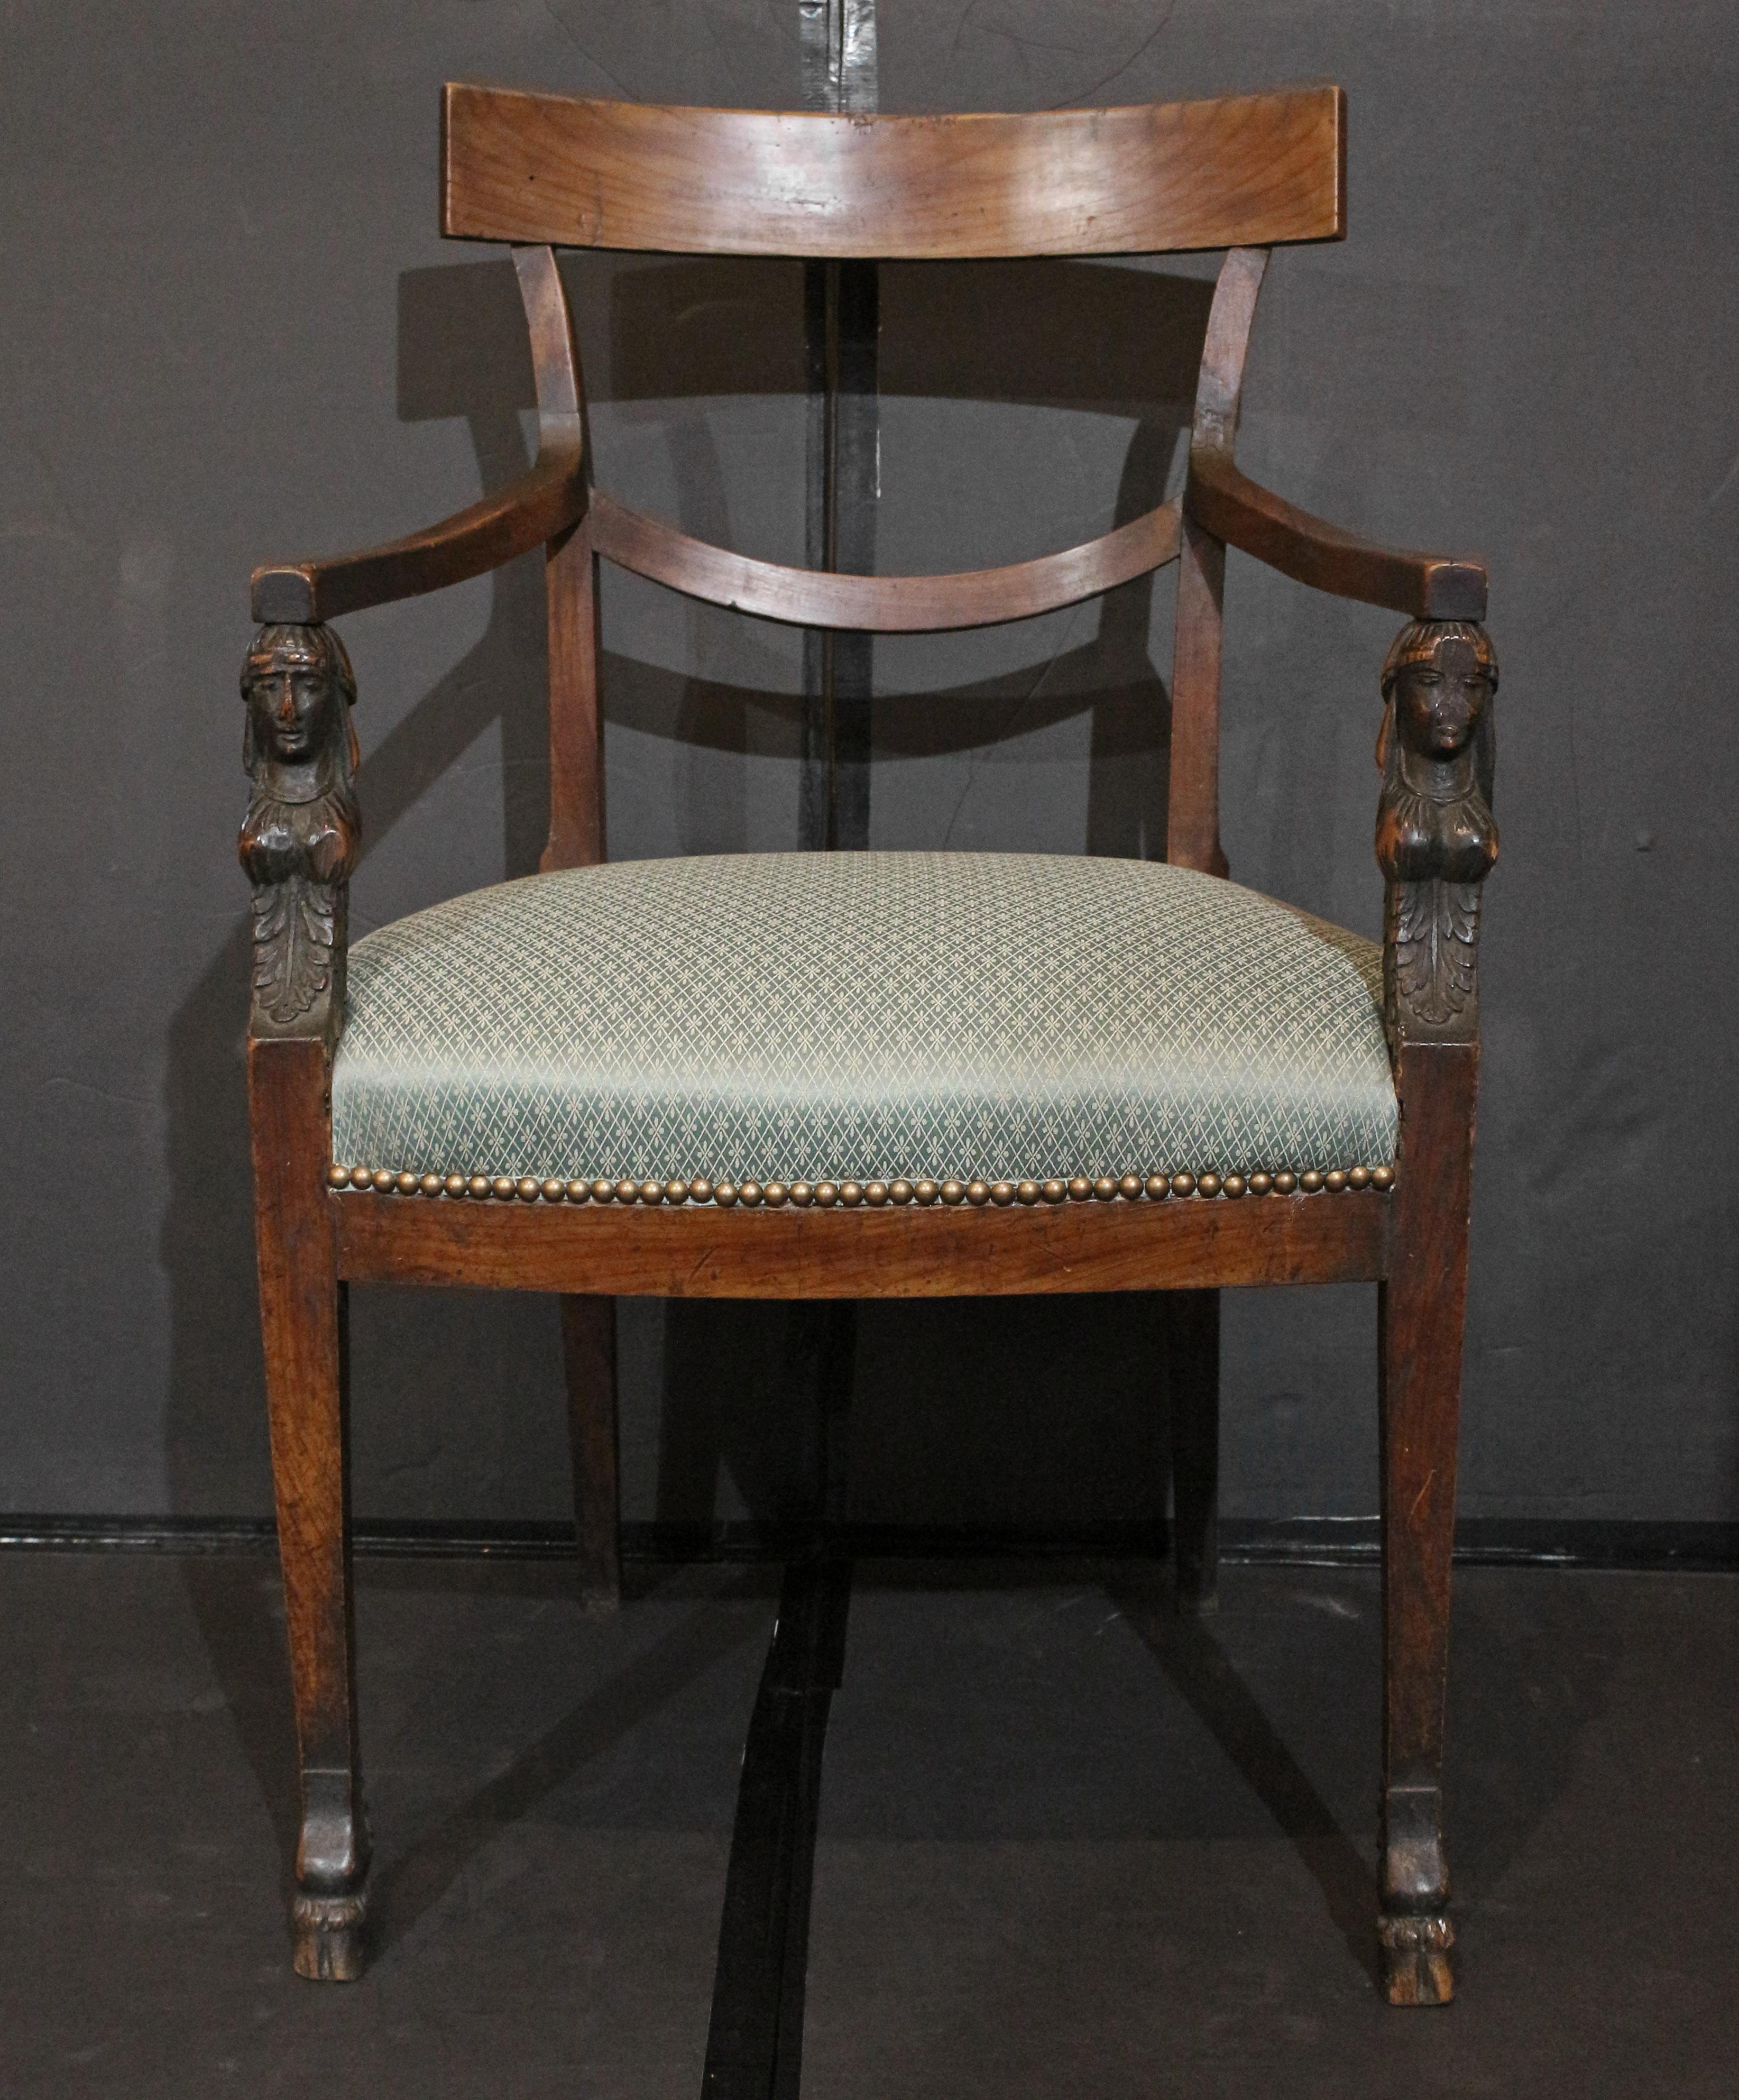 Early 19th century Empire period fauteuil (or open arm chair), French. Curved open back with graceful curved cross bar. The straight, tapered front legs surmounted by carved Egyptian busts of women (one's face quite worn) over acanthus leaf carving